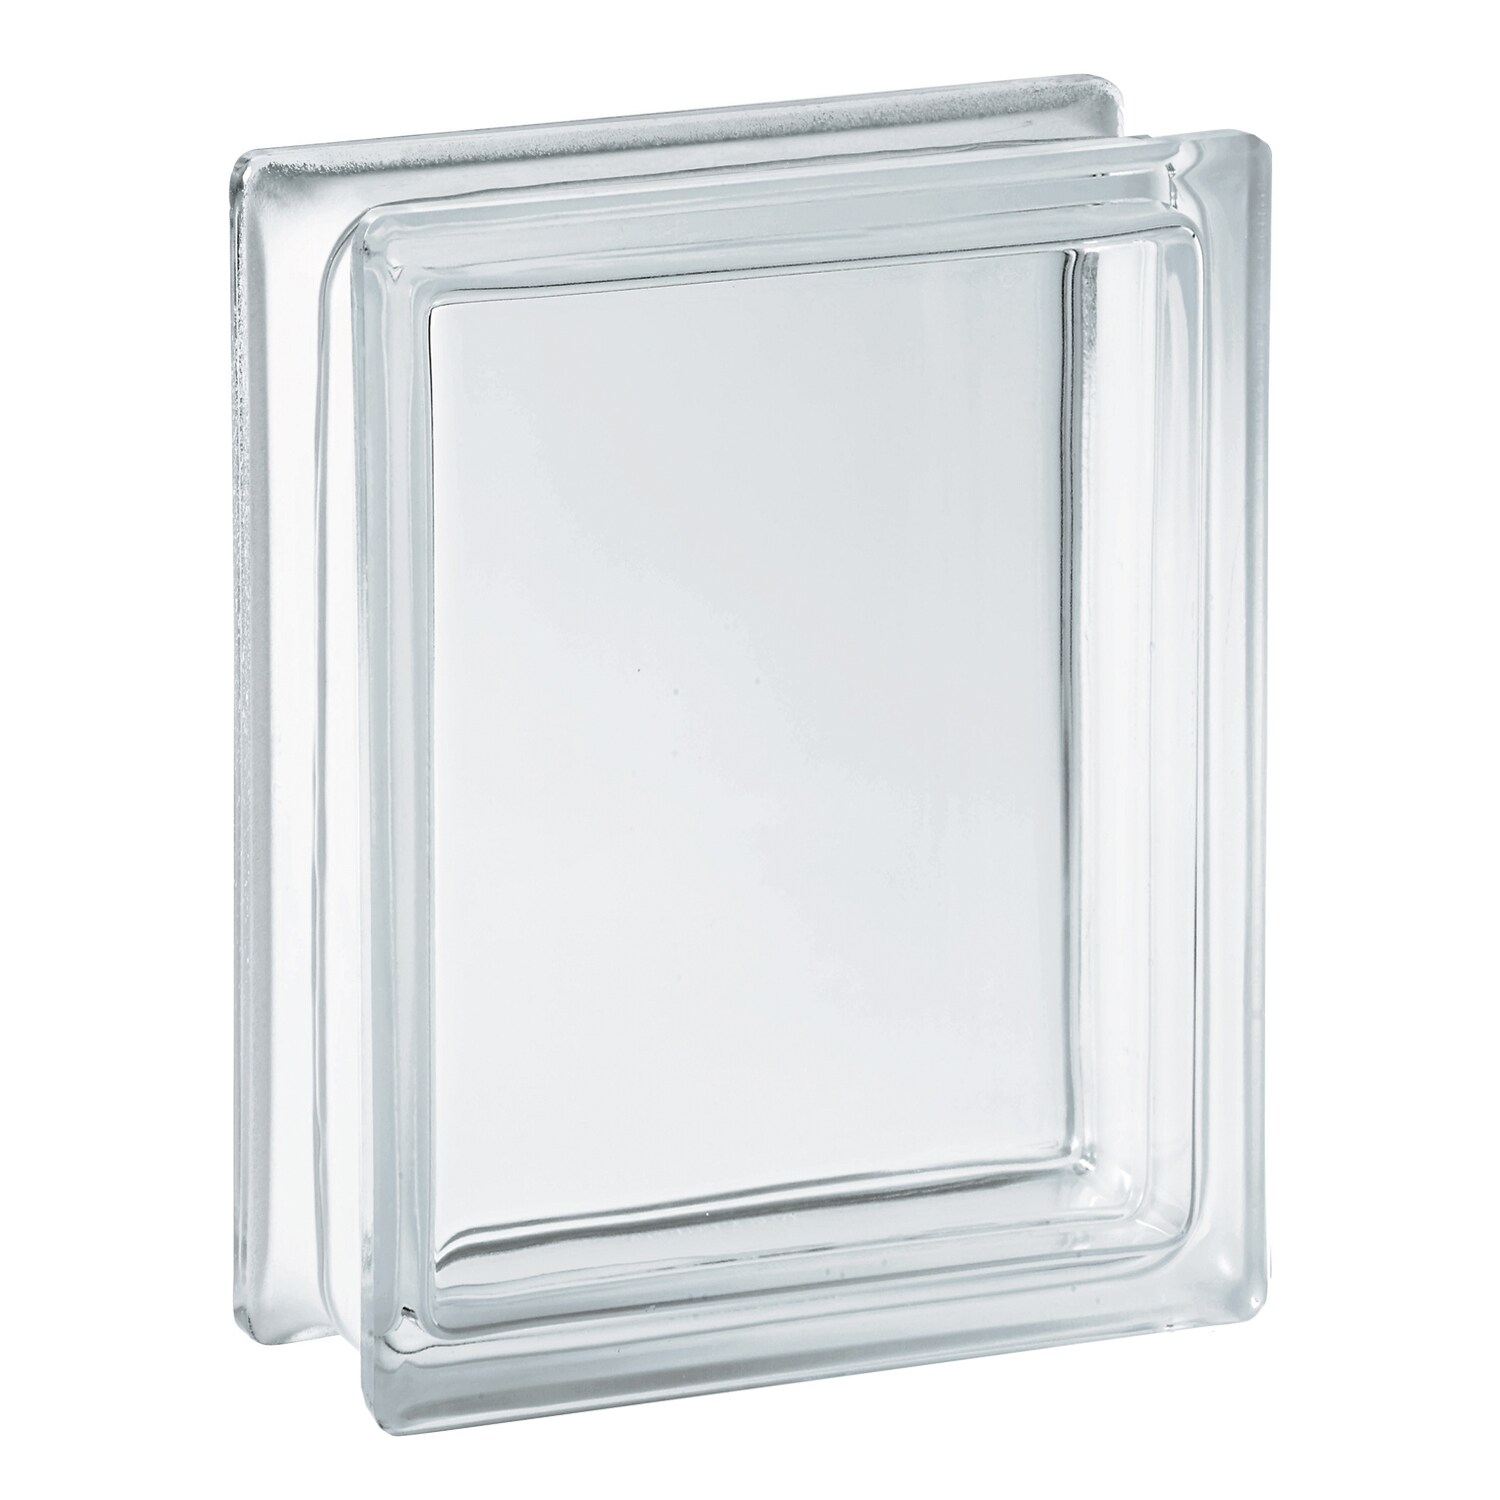 Hy-Lite Craft Block 24-Pack Clear Wave Acrylic Block (8-in H x 8